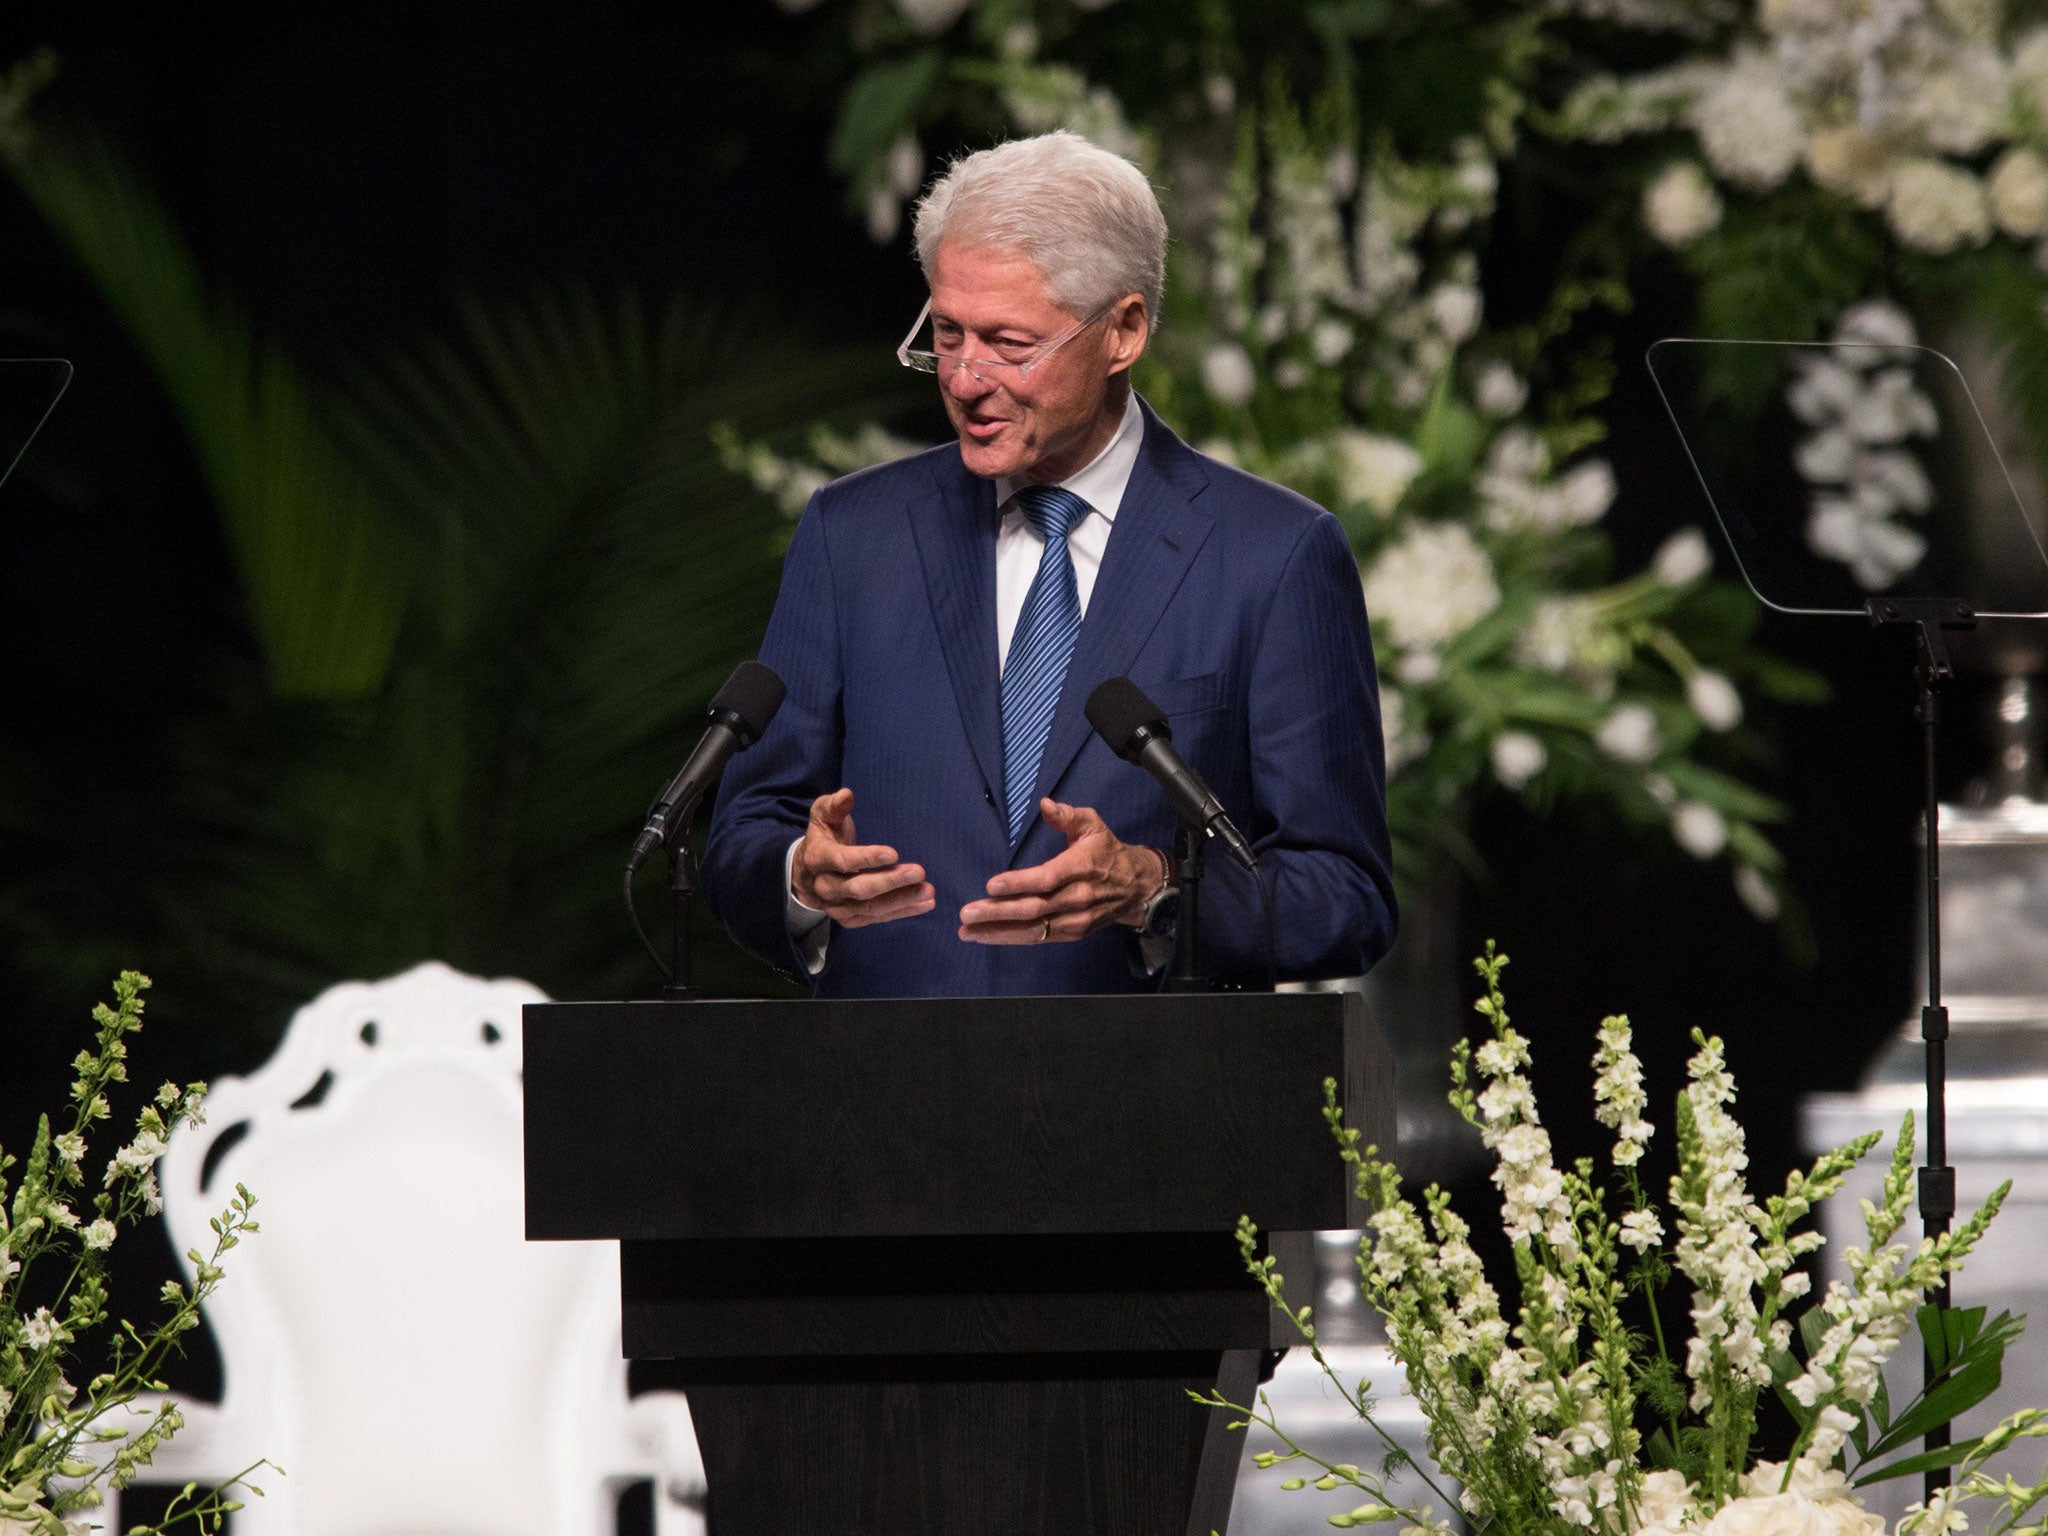 Former US President Bill Clinton wrapped up proceedings